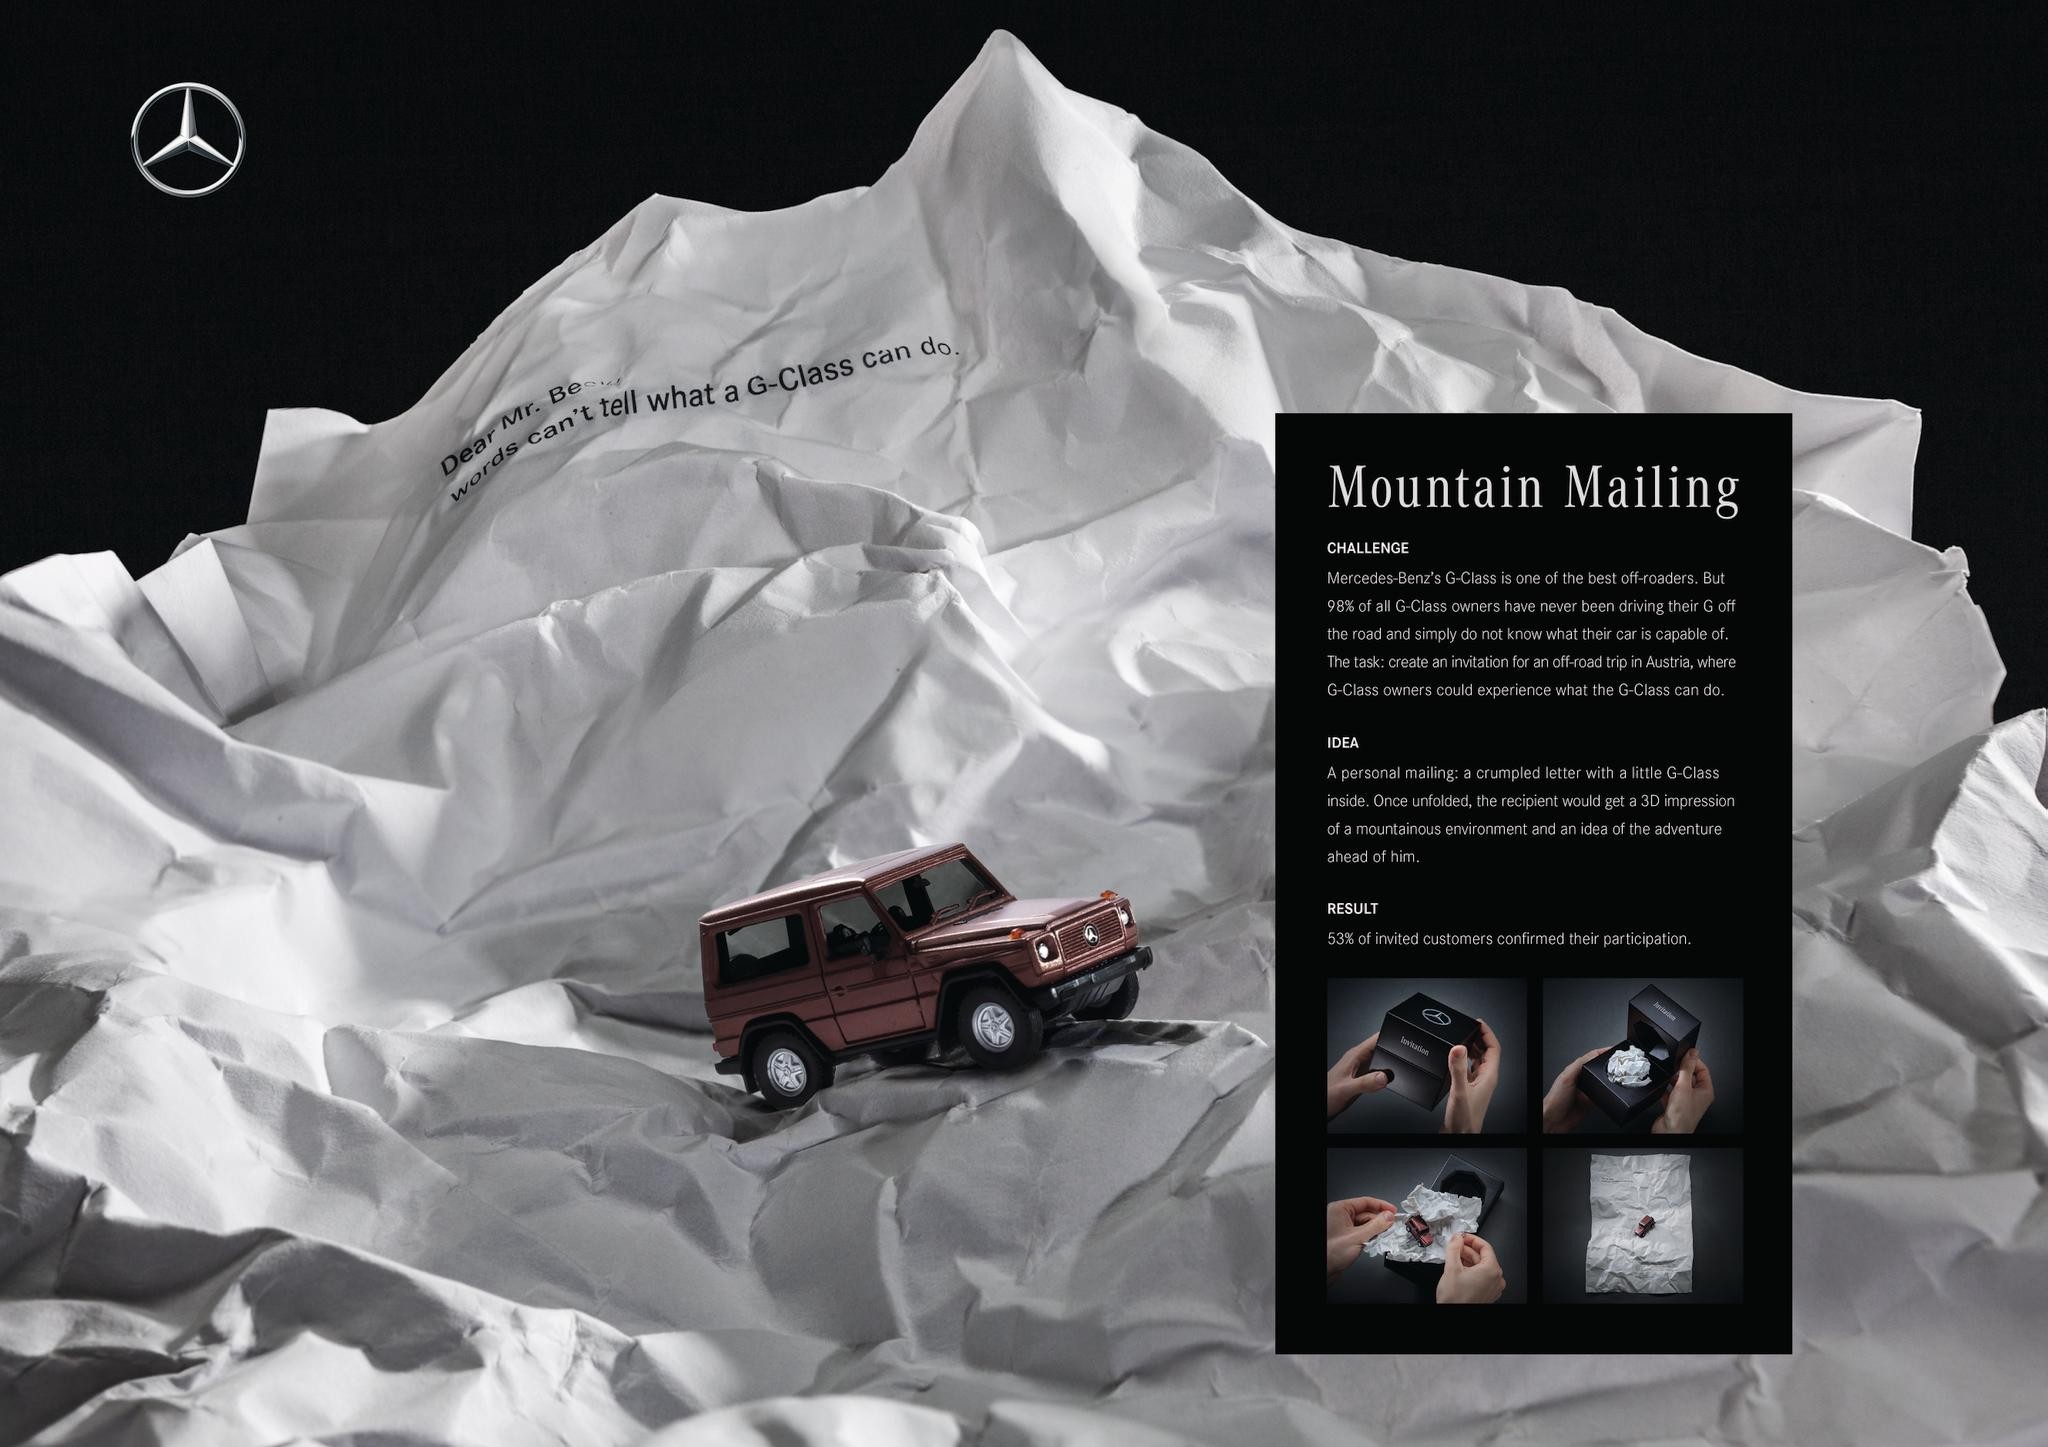 Mountain Mailing